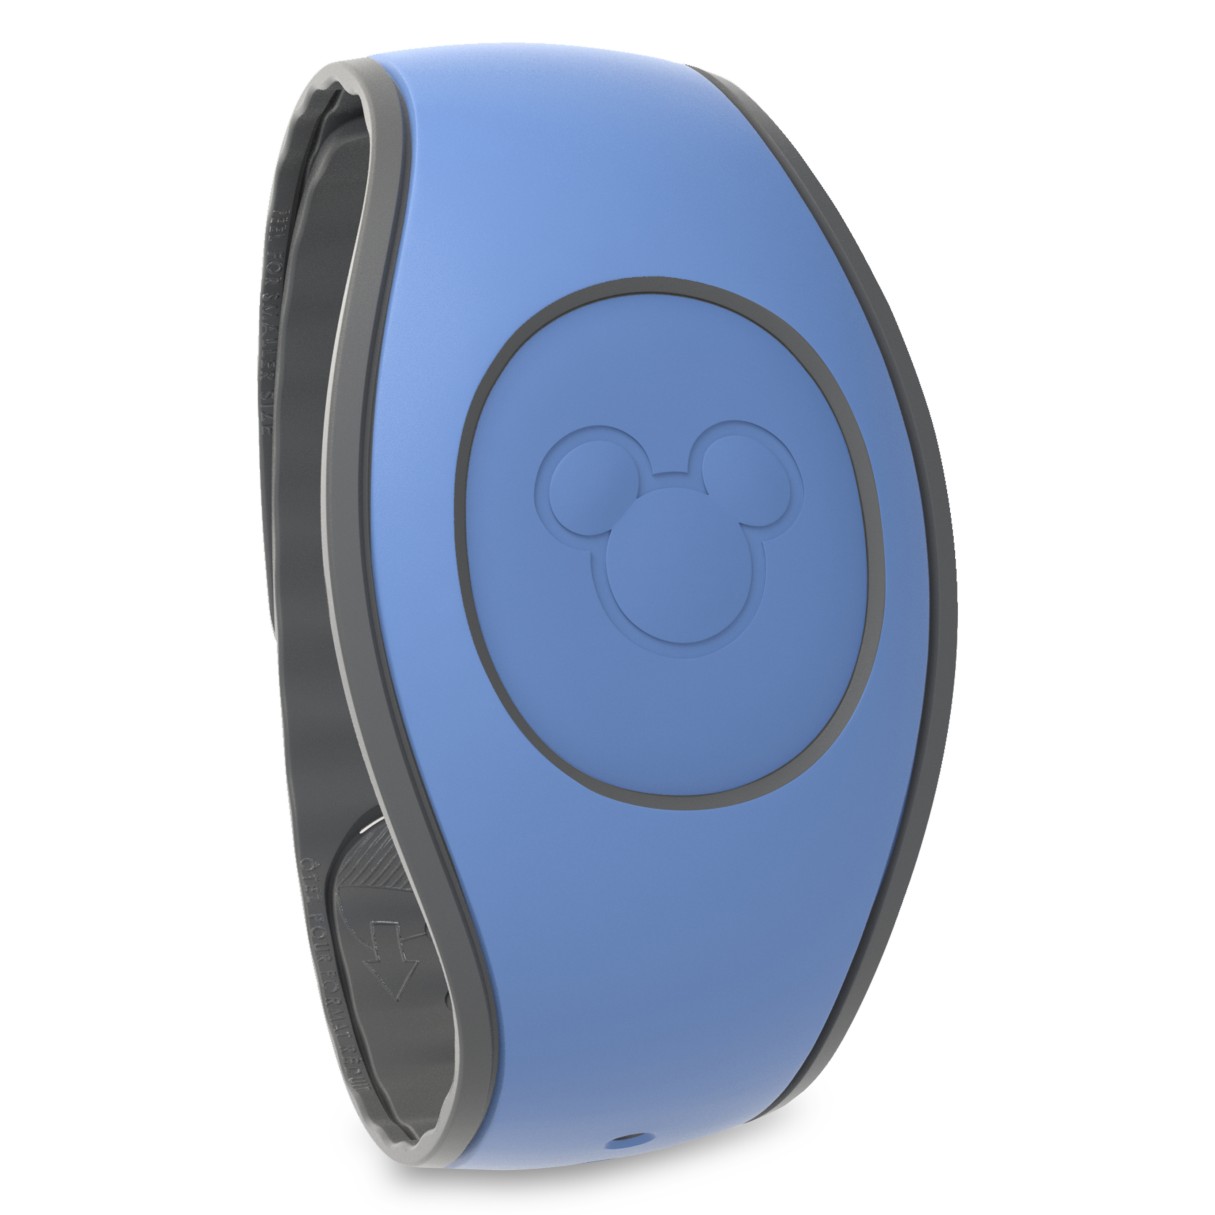  Disney Parks Exclusive - MagicBand 2.0 Link It Later